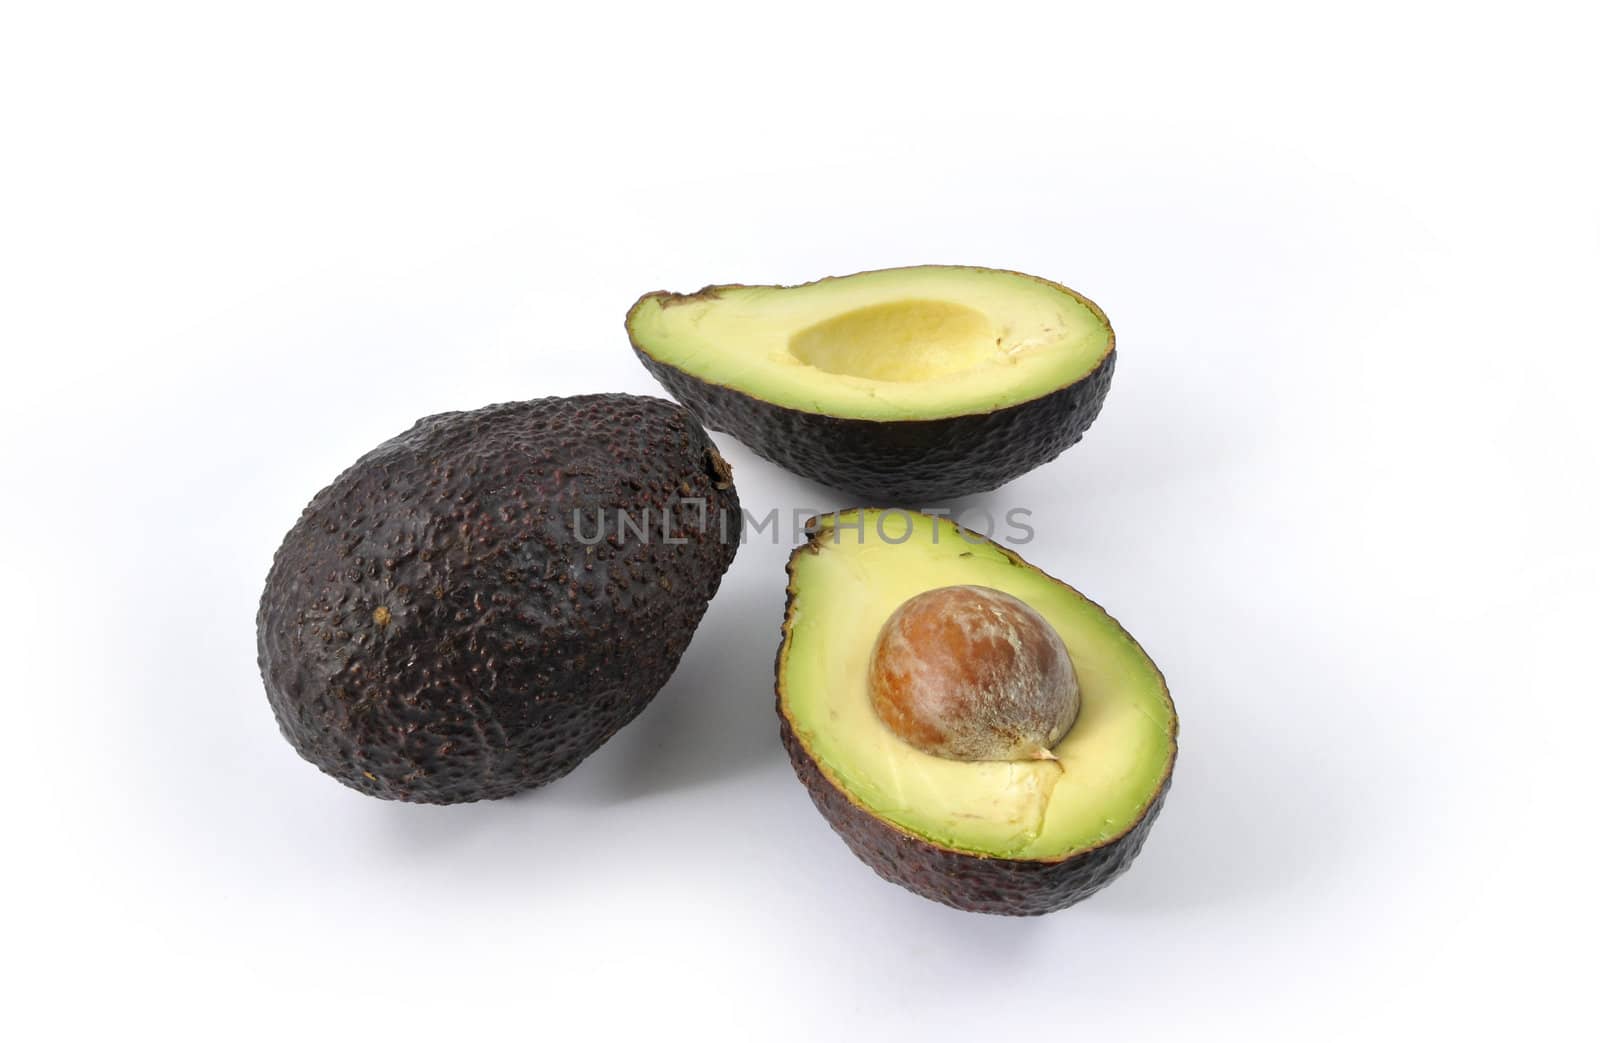 An avocado opened with another one on a white background